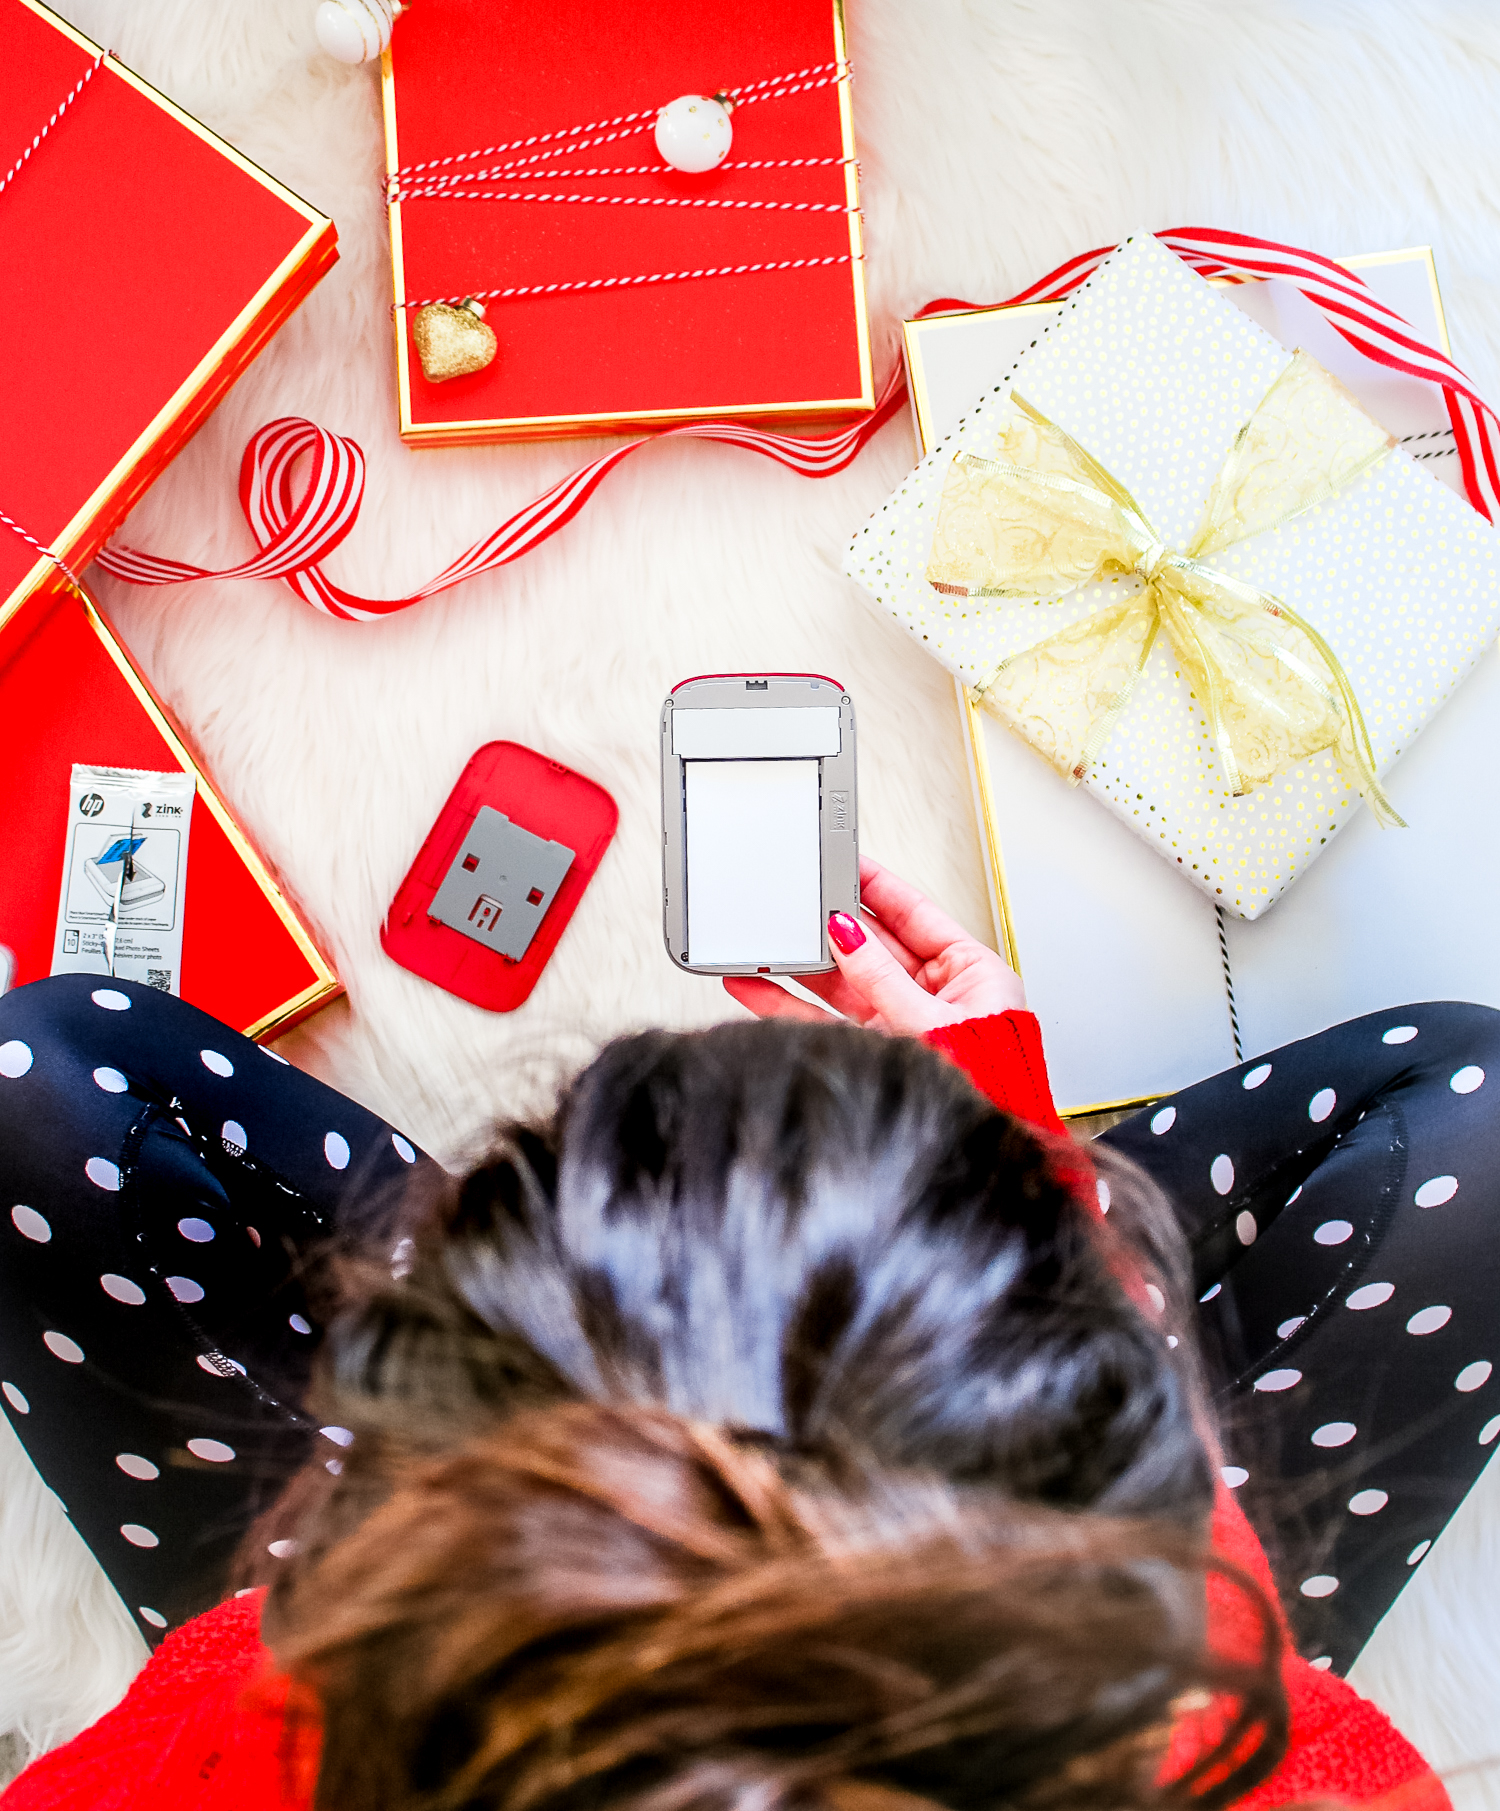 Red HP Sprocket Photo Printer, which makes a perfect stocking stuffer and is the best instant photo printer for events and travel by southern blogger Stephanie Ziajka from Diary of a Debutante